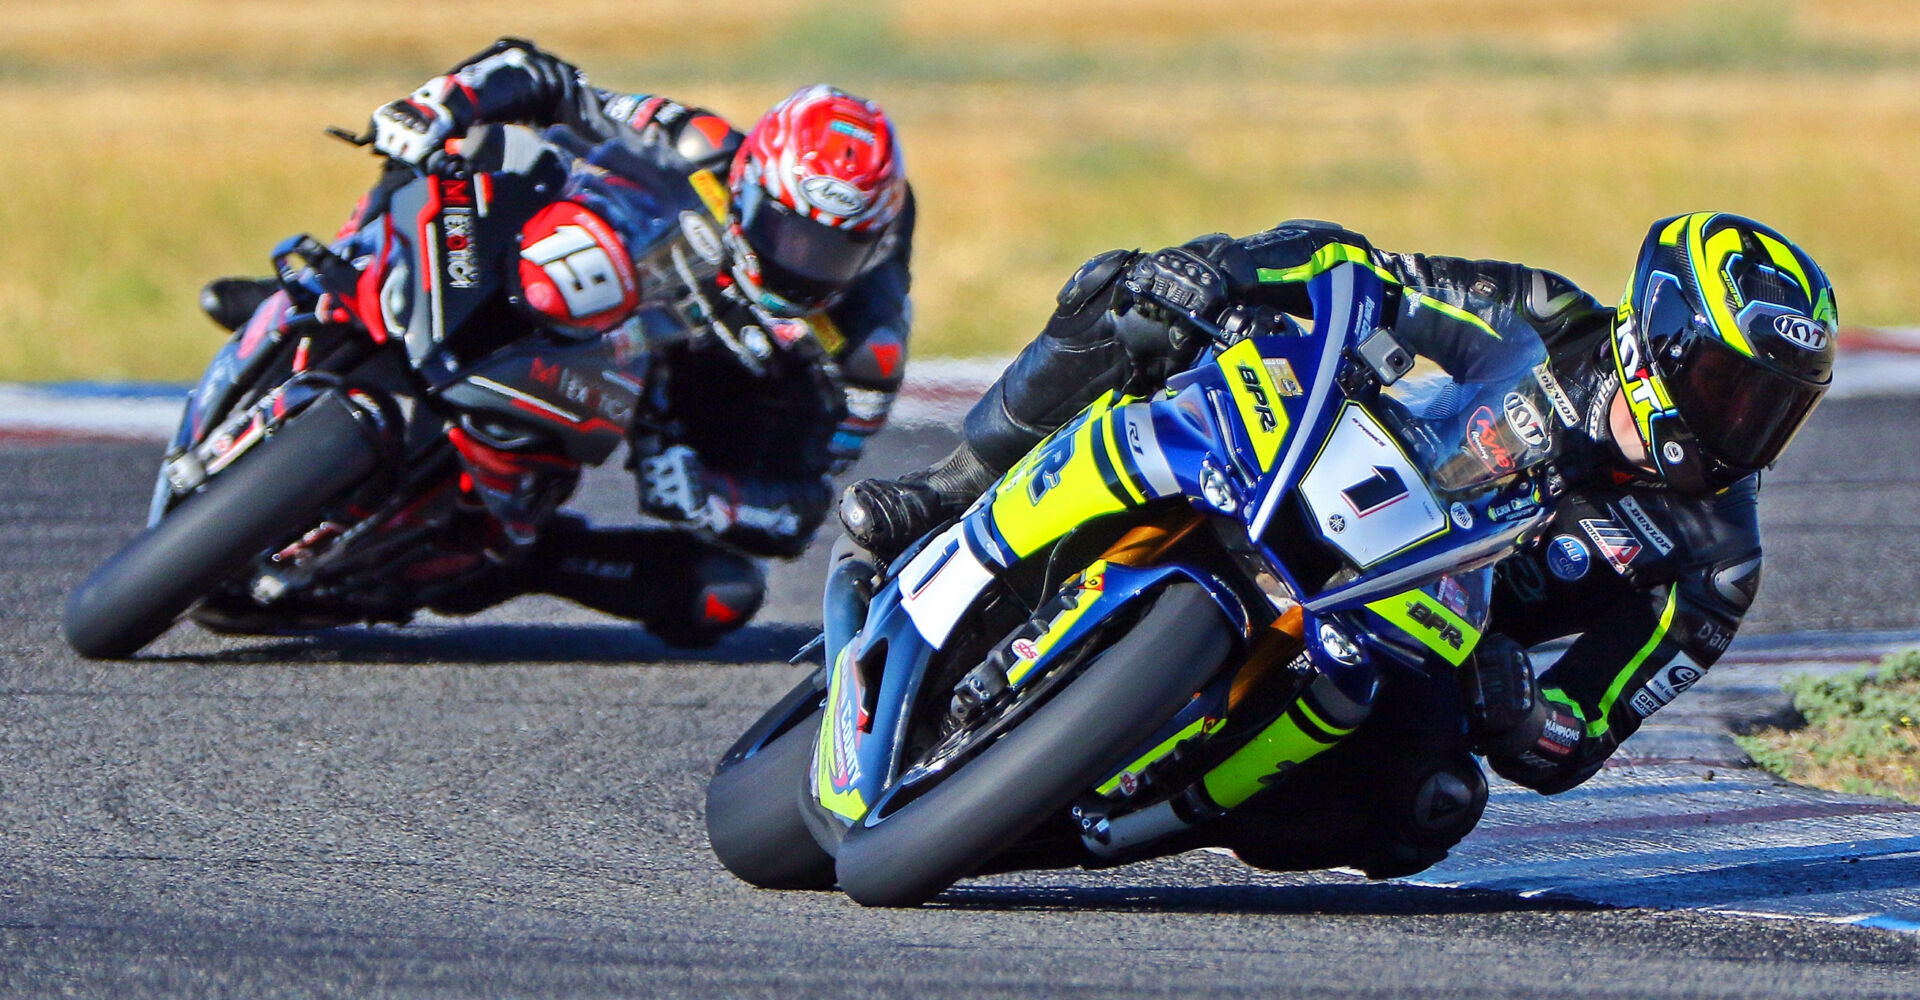 Bryce Prince (1) leads Wyatt Farris (19) in the CRA CTML Consultants Gold Cup race at Buttonwillow Raceway Park. Farris took the win by nearly six seconds. Photo by CaliPhotography, courtesy CRA.